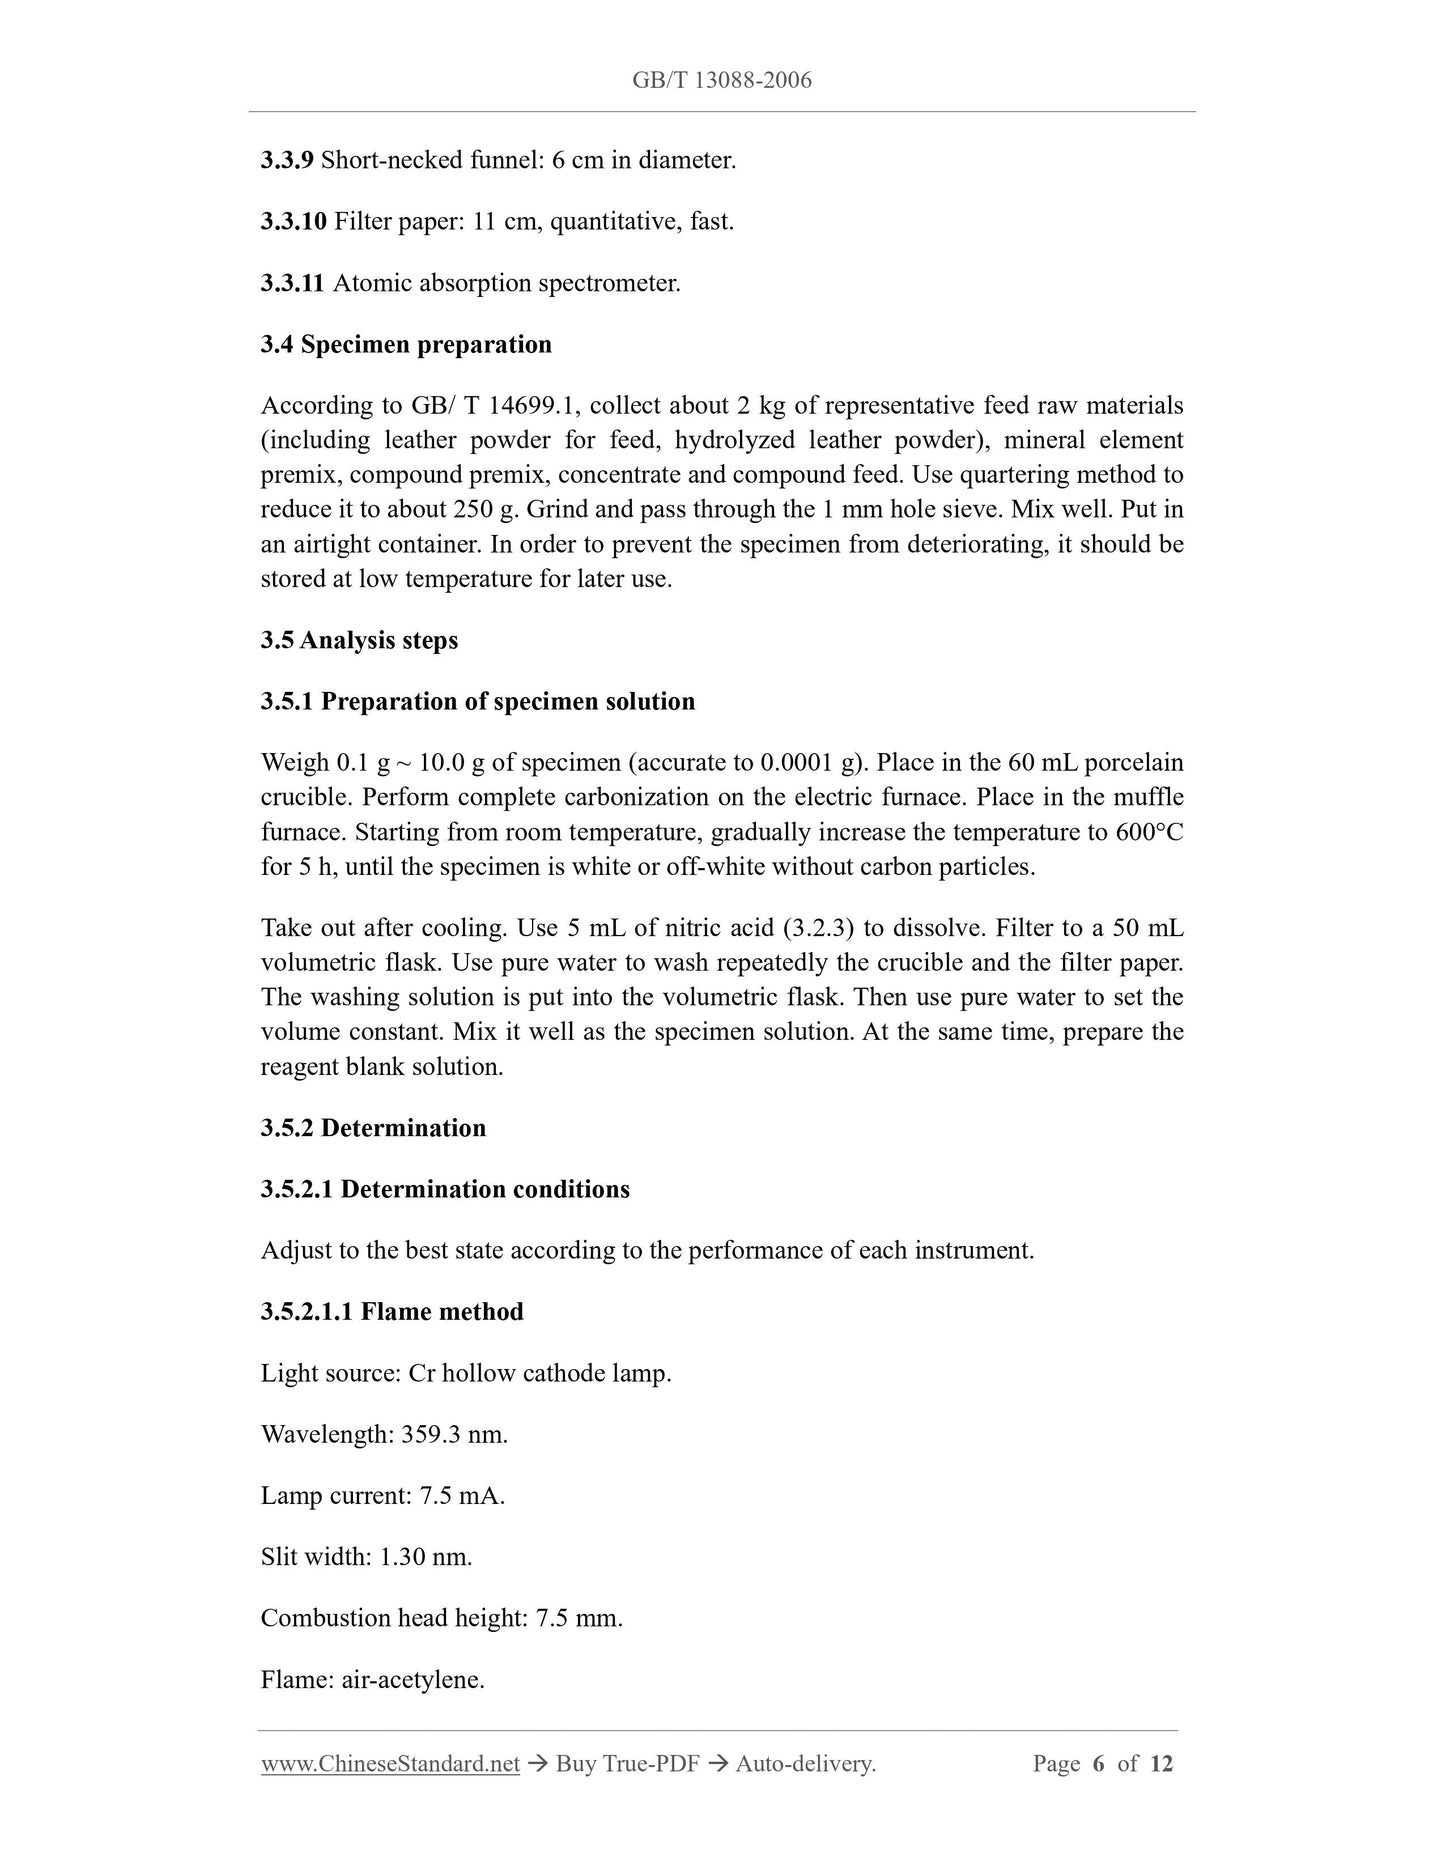 GB/T 13088-2006 Page 5